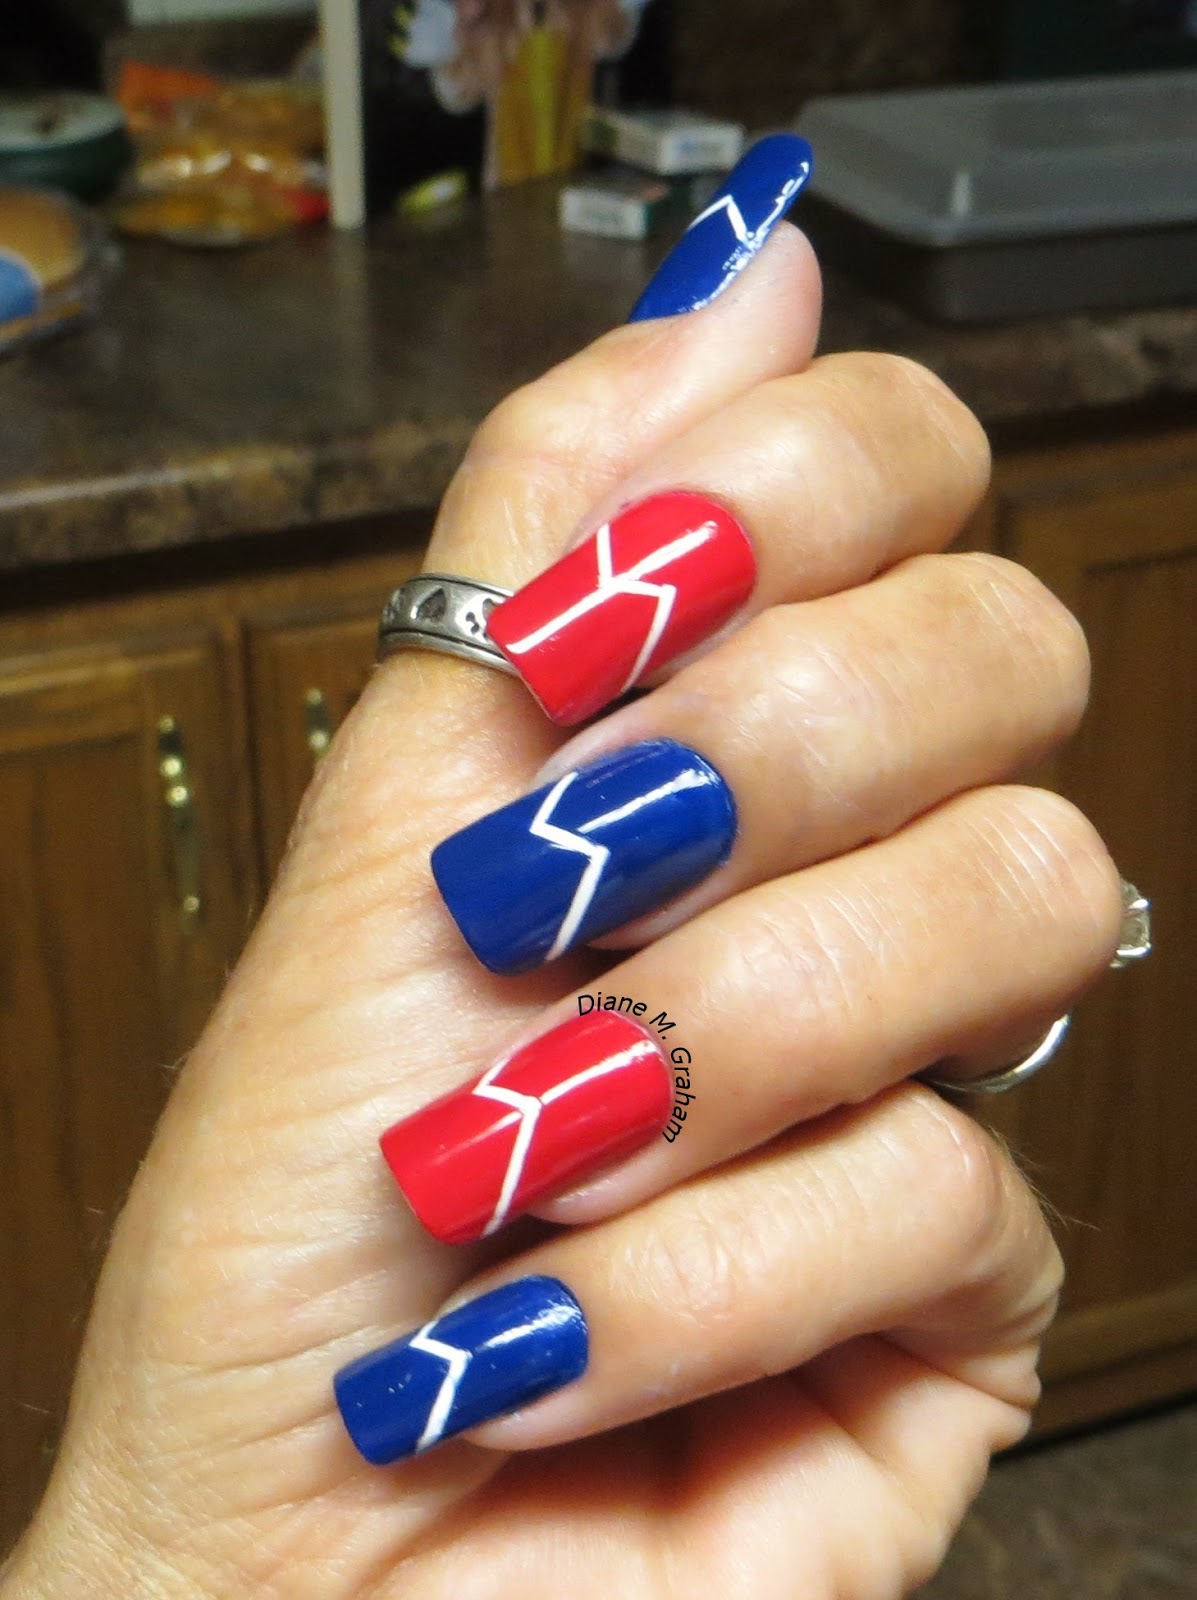 Simple Square Nails for 4th of July Celebrations!